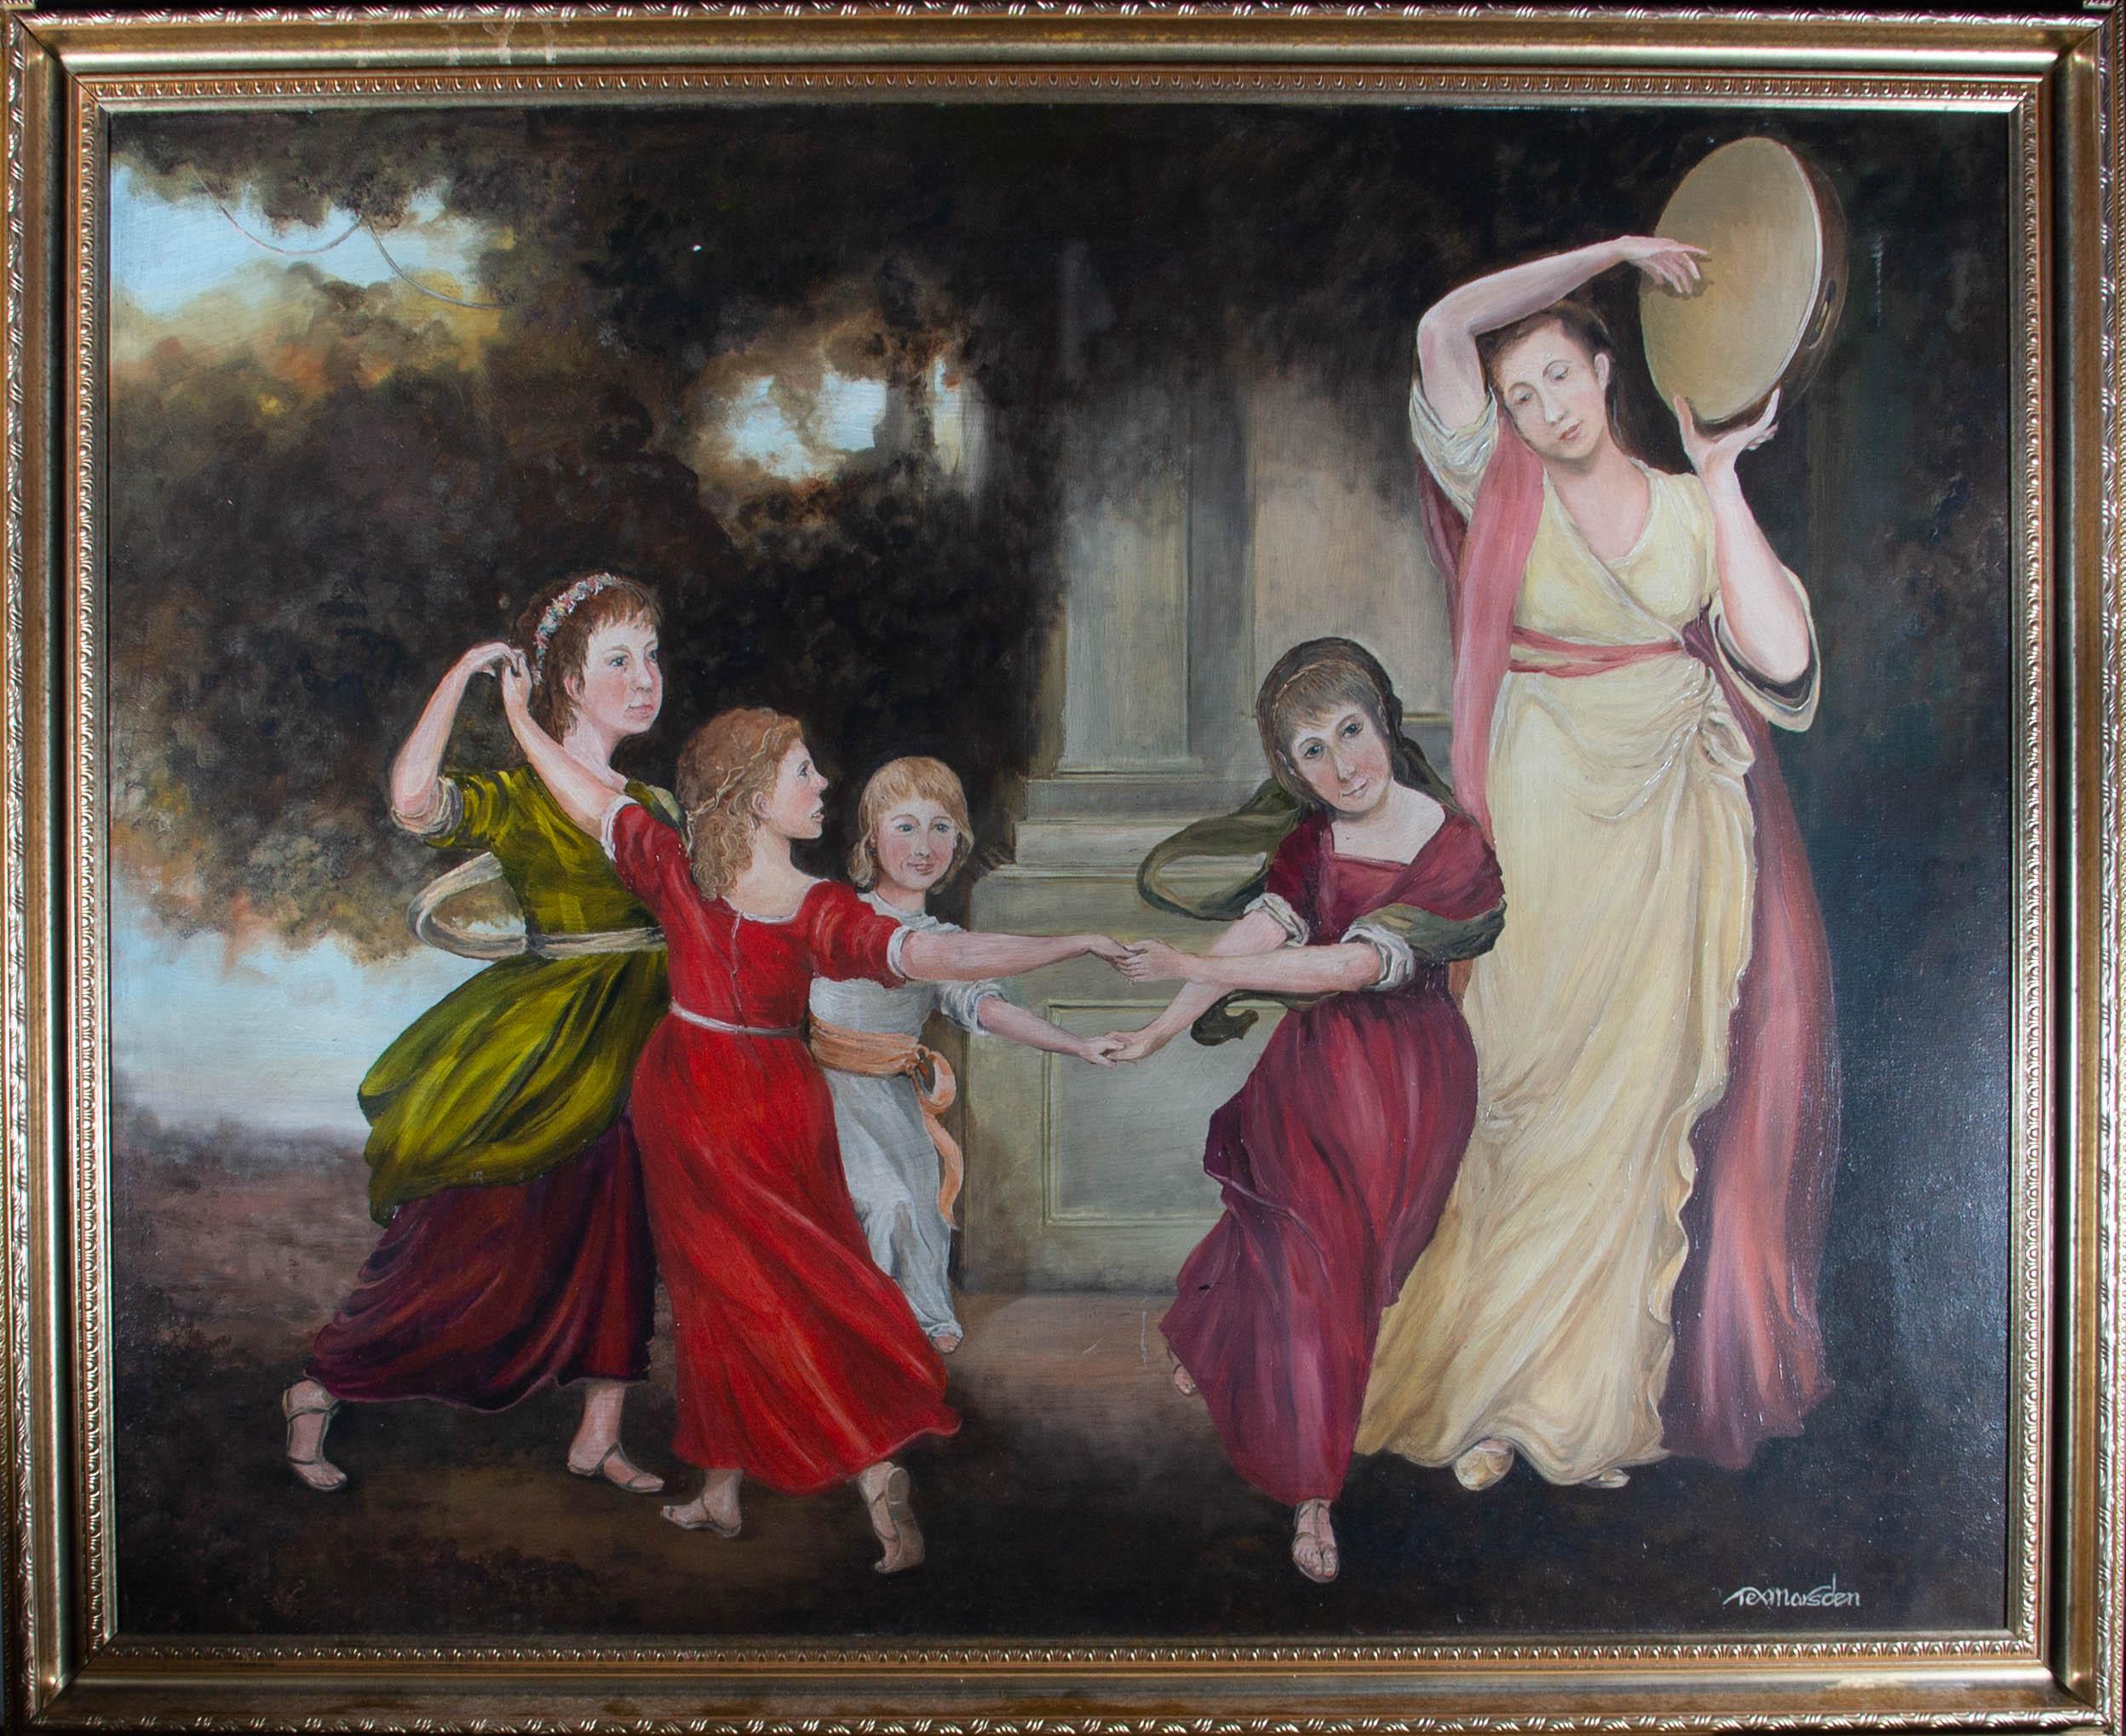 An impressively sized contemporary copy of the original painting of the Gower family children by the renowned British portrait painter, George Romney. The artist has signed to the lower right corner and the painting has been presented in a